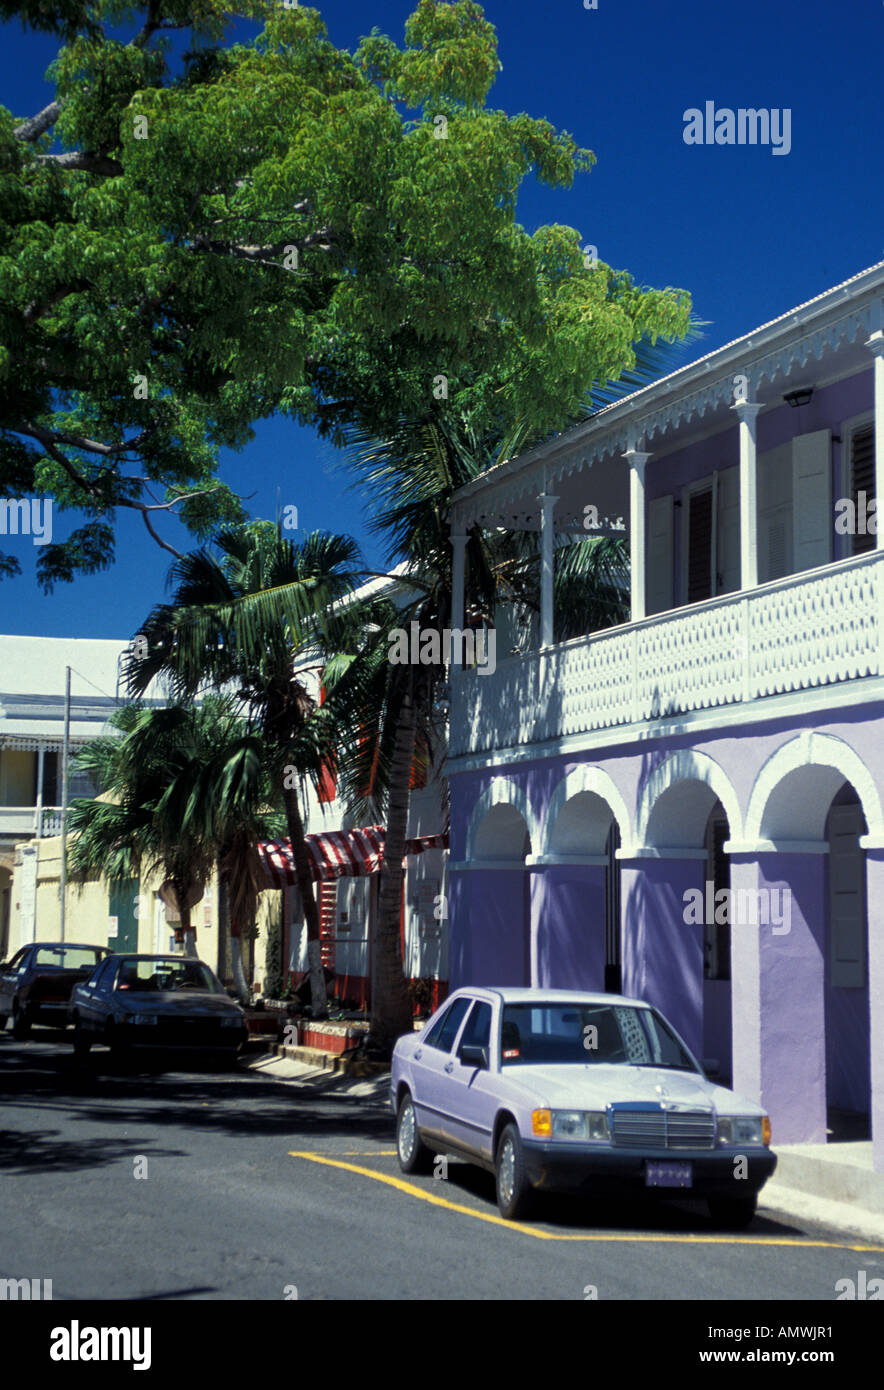 St Croix Frederiksted purple car, building with purple arches Stock Photo